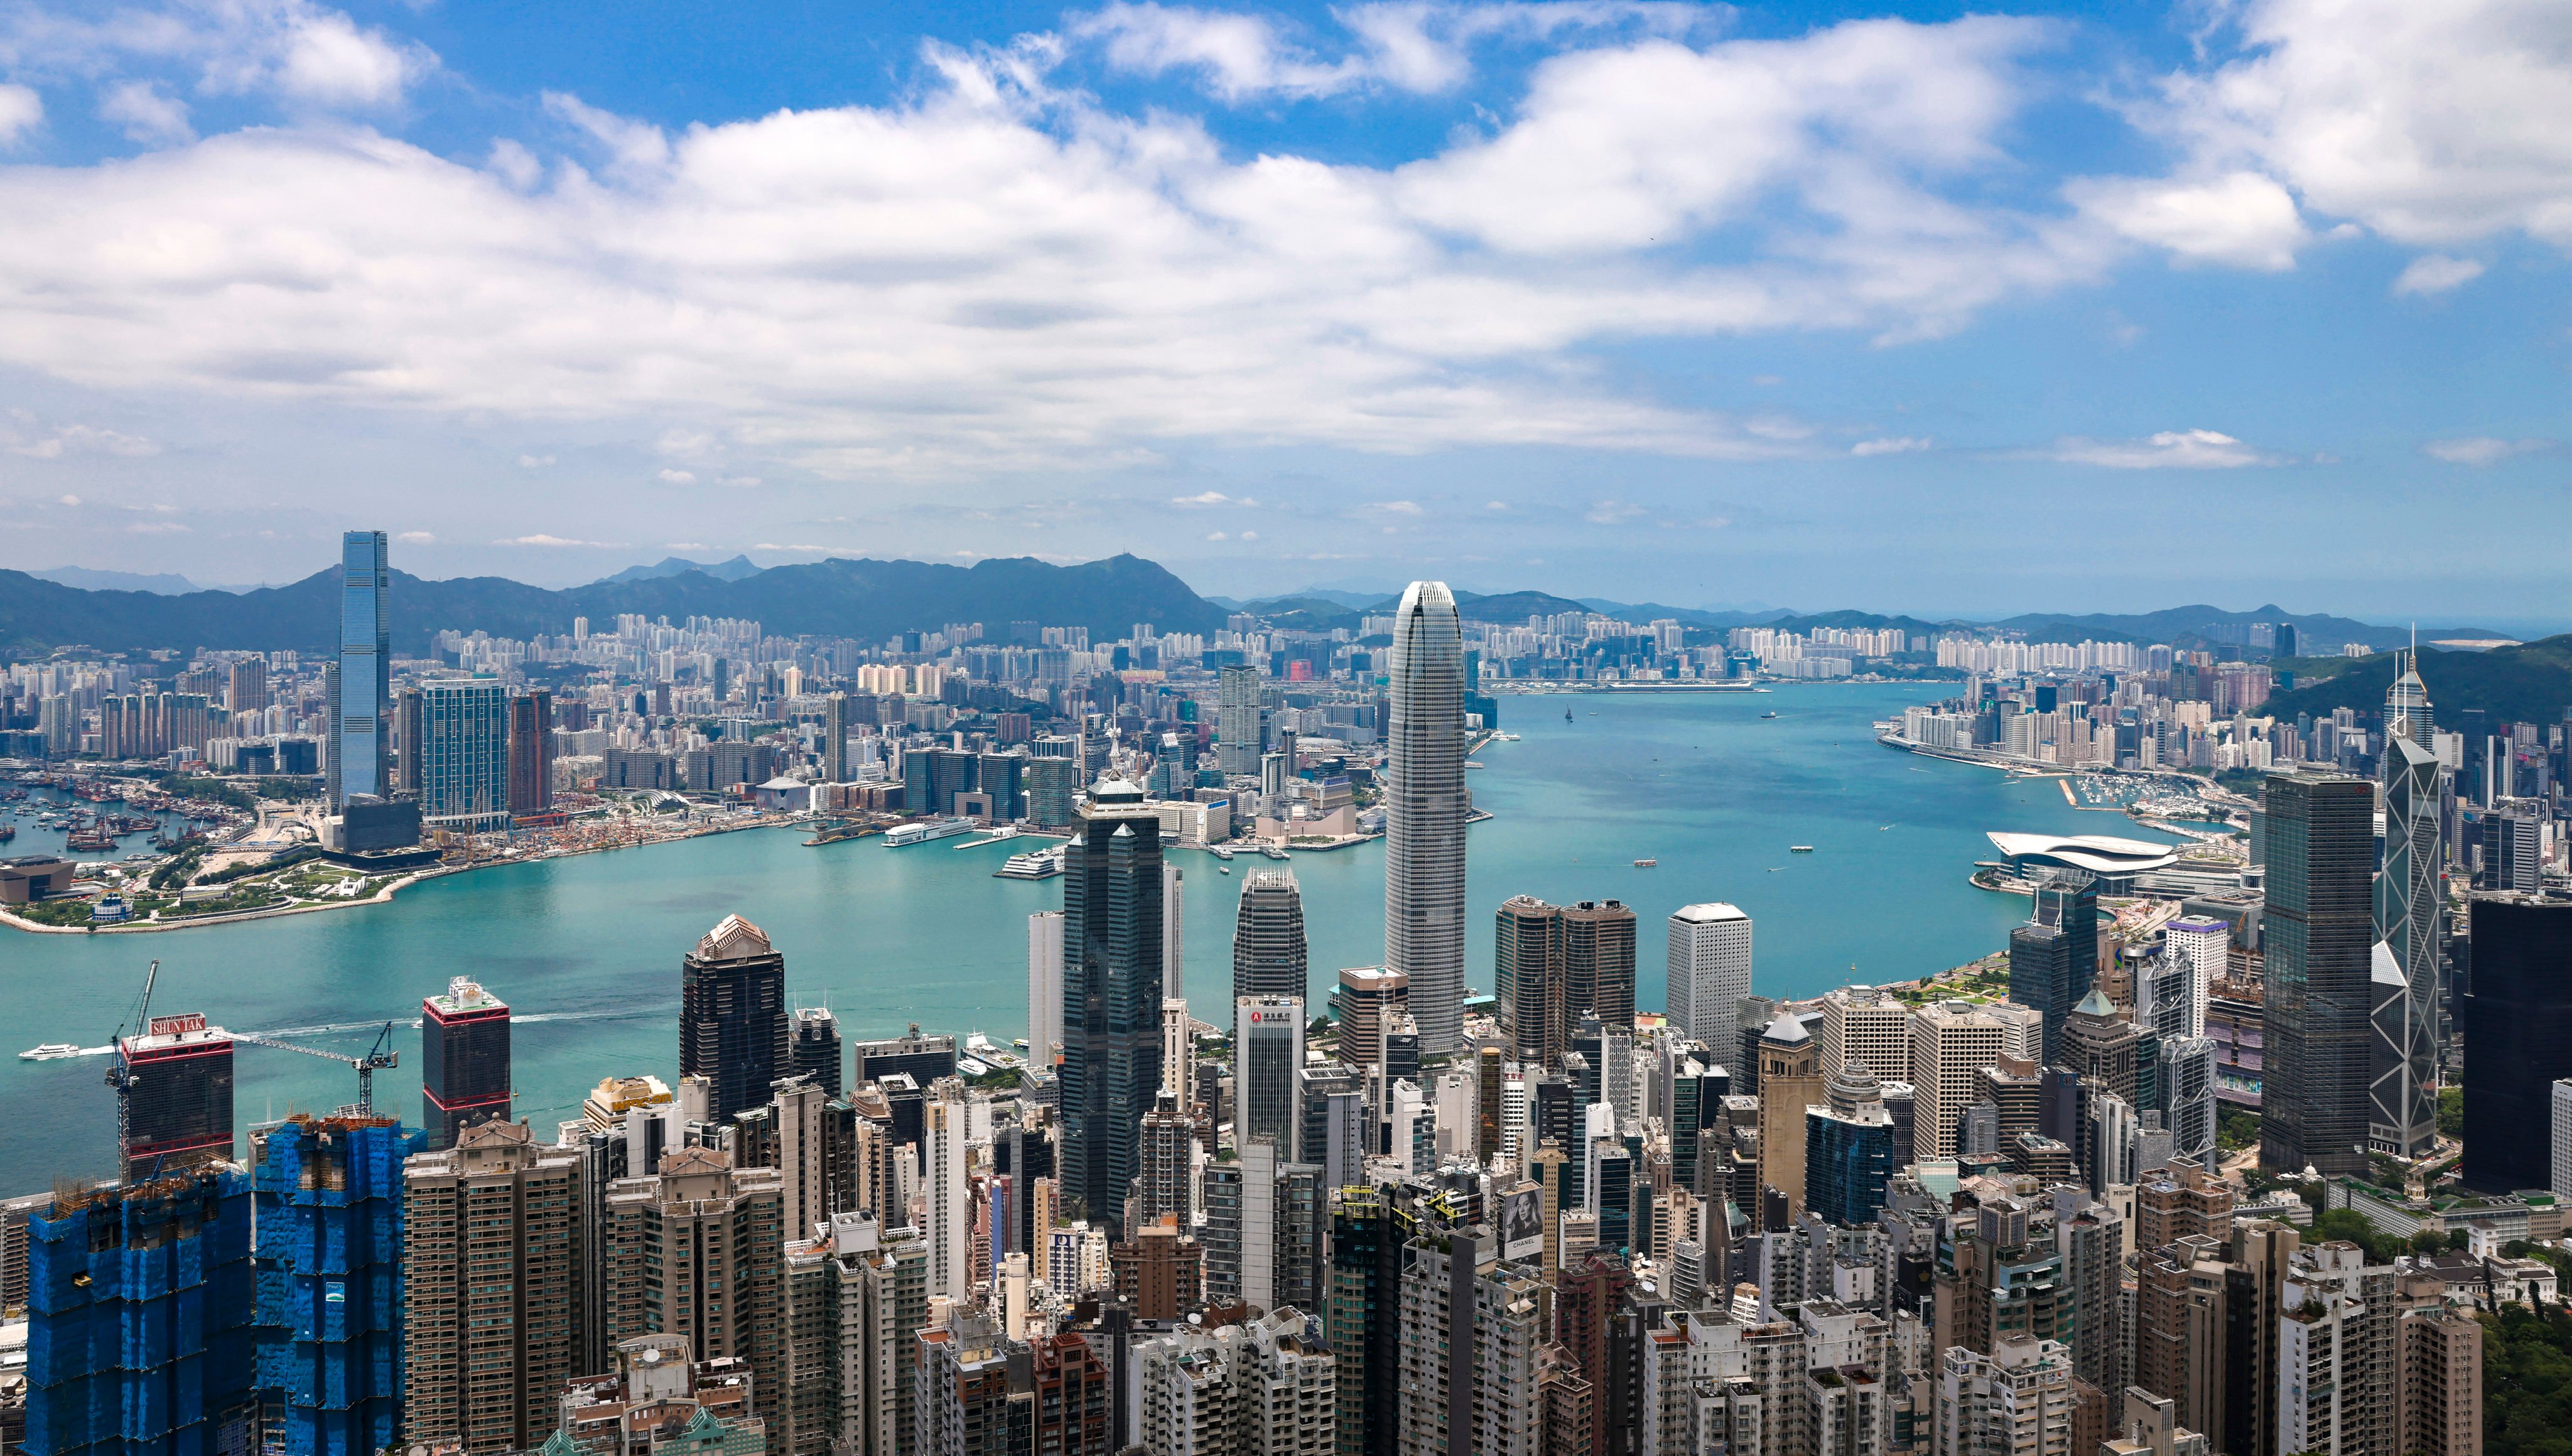 A view of the Hong Kong skyline from The Peak in May 2022. Photo: K. Y. Cheng